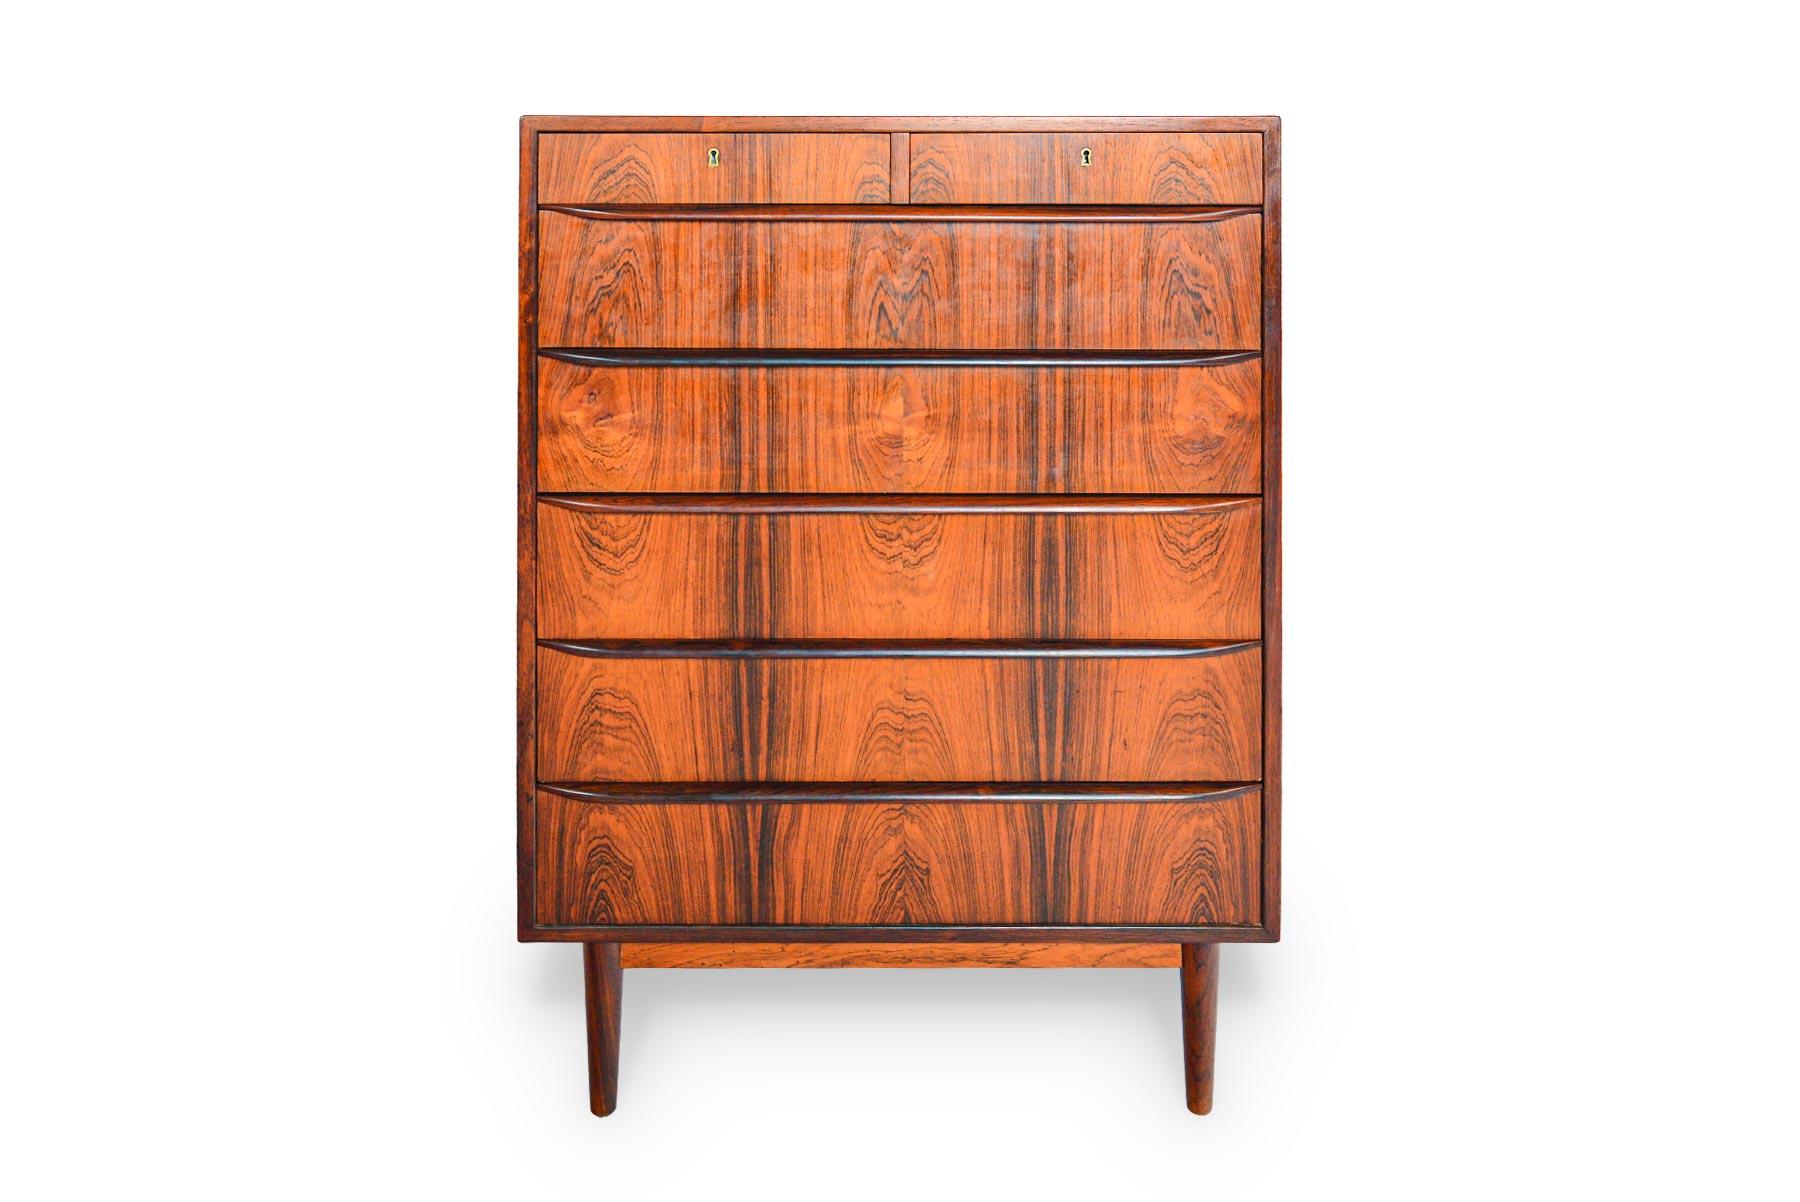 This gorgeous Danish modern seven-drawer midcentury rosewood dresser offers an elegant storage solution. Top drawers are split and accessible by key. Rich woodgrain and high quality construction define this Classic piece. In excellent original